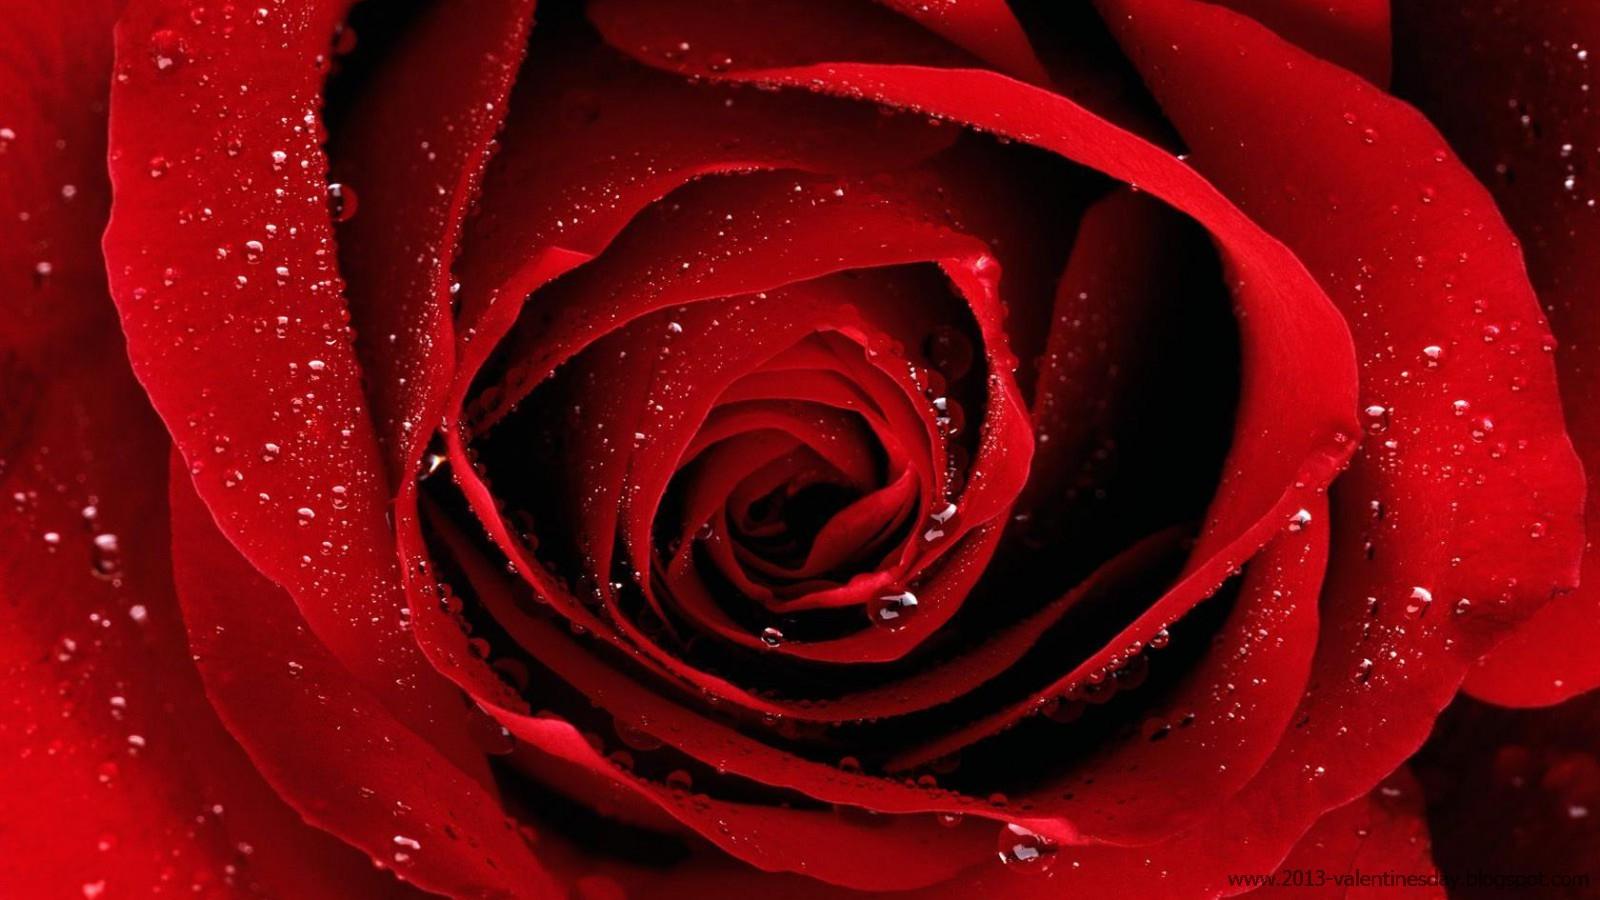 Happy Rose Day Image, Picture & Wallpaper 2020 HD